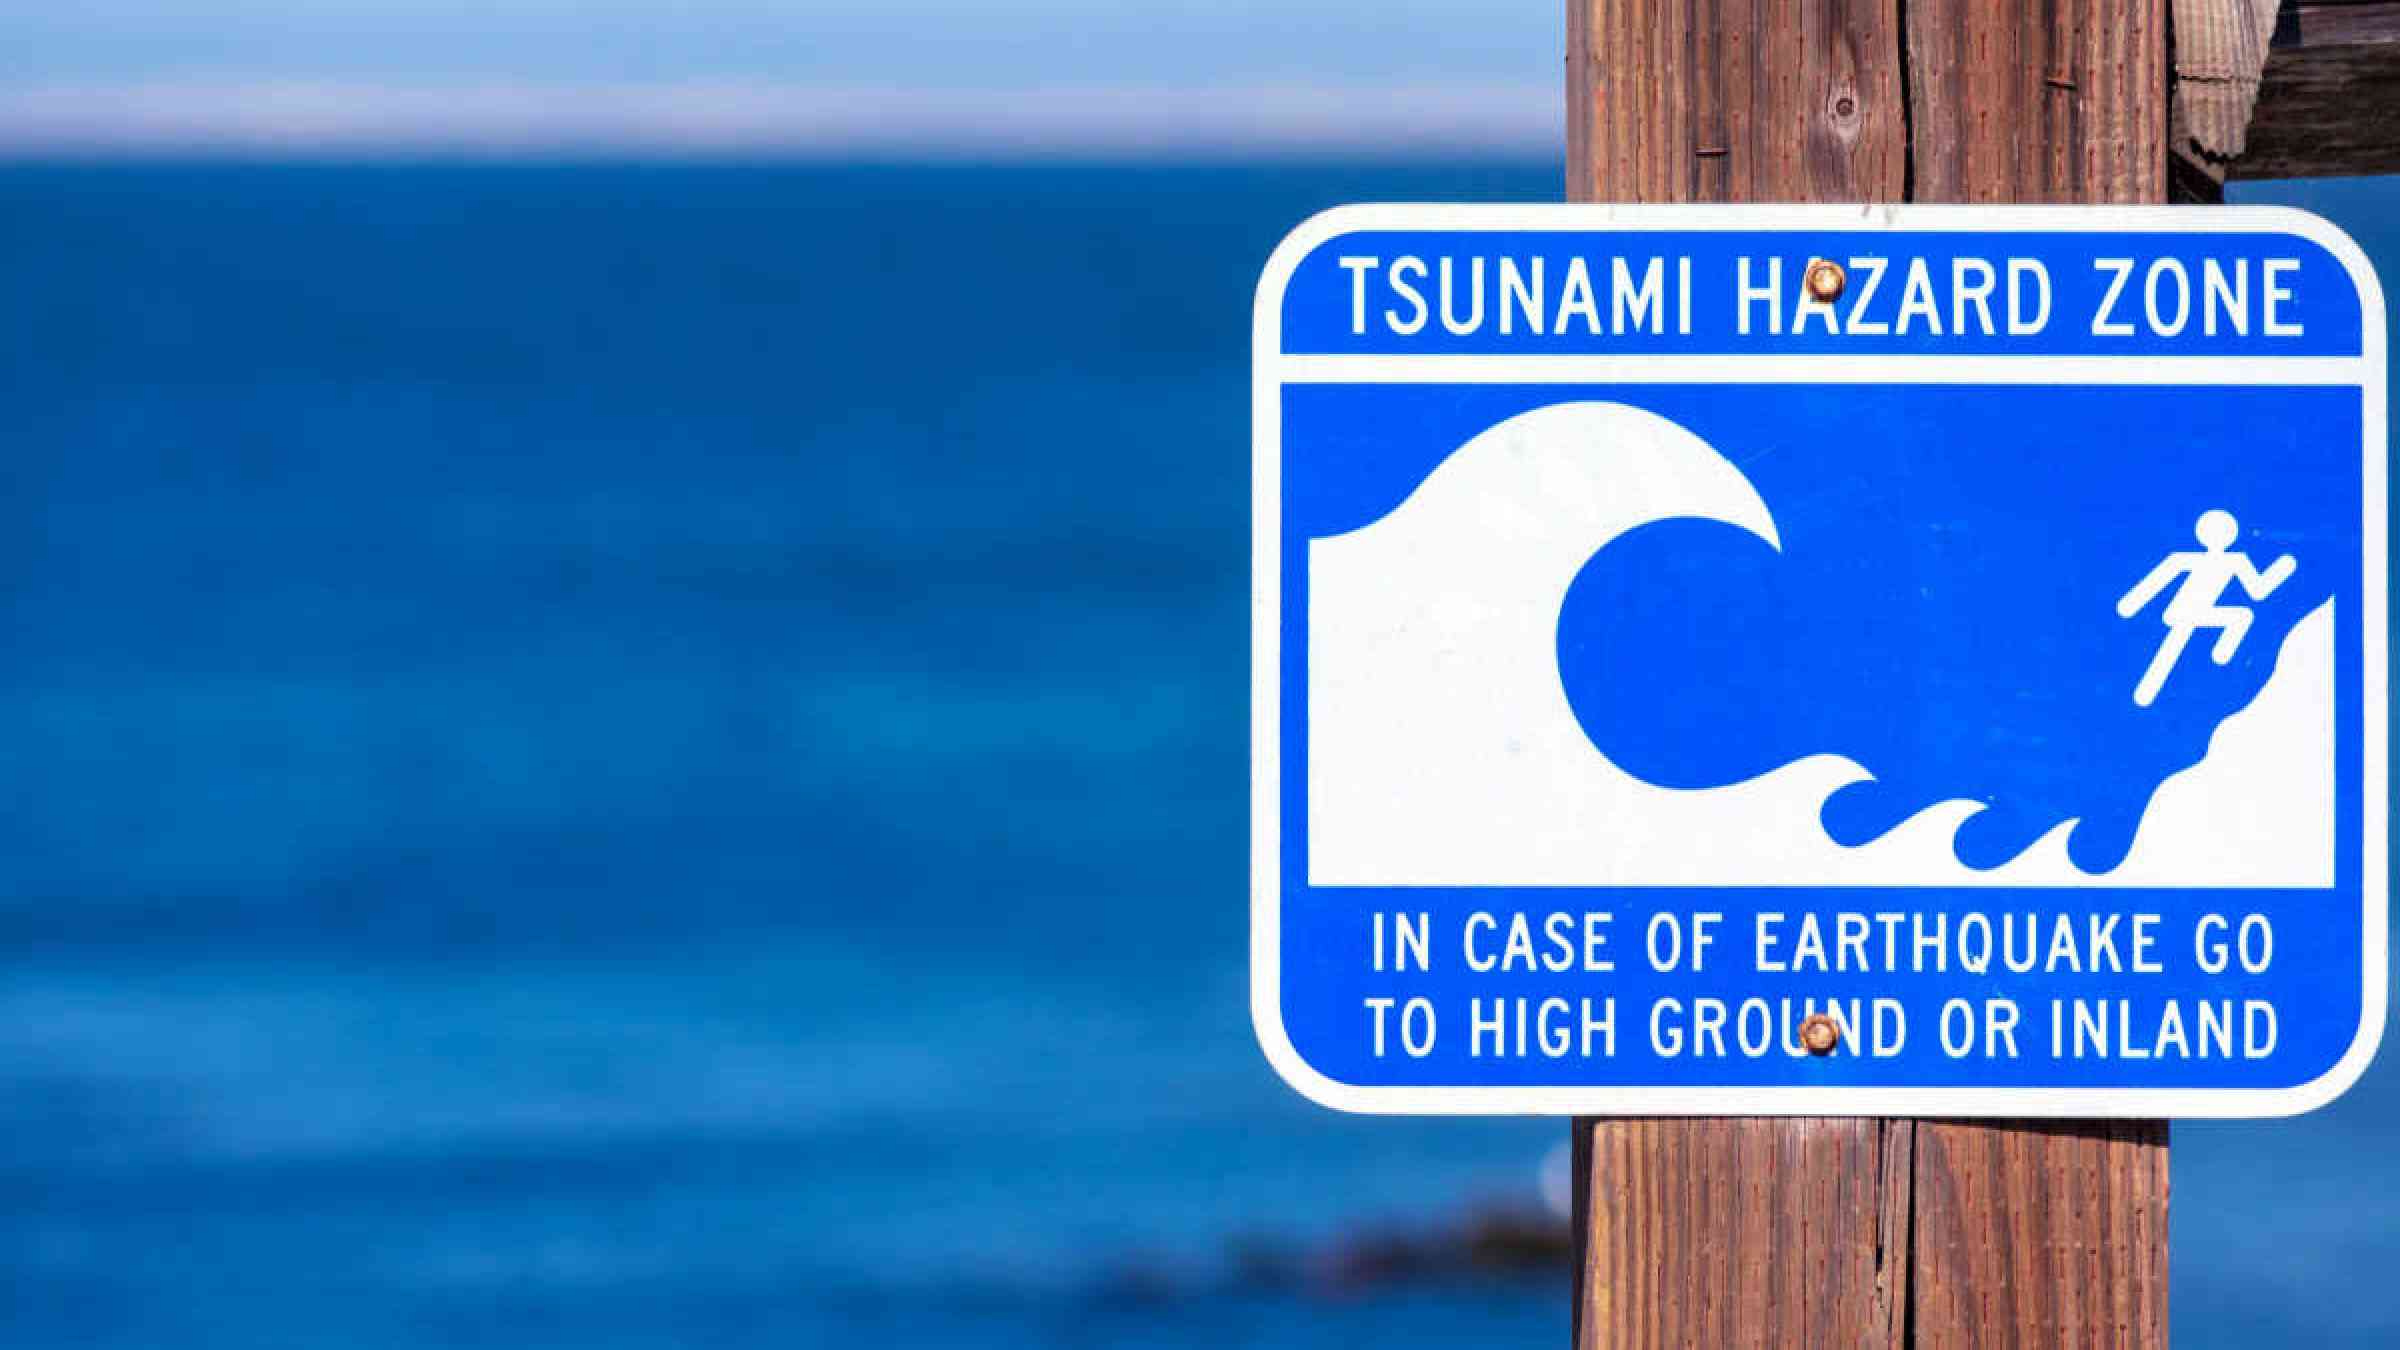 Tsunami Hazard Zone warning sign on the Pacific Ocean coast warn the public about possible danger after an earthquake. Blurred blue ocean surface on horizon